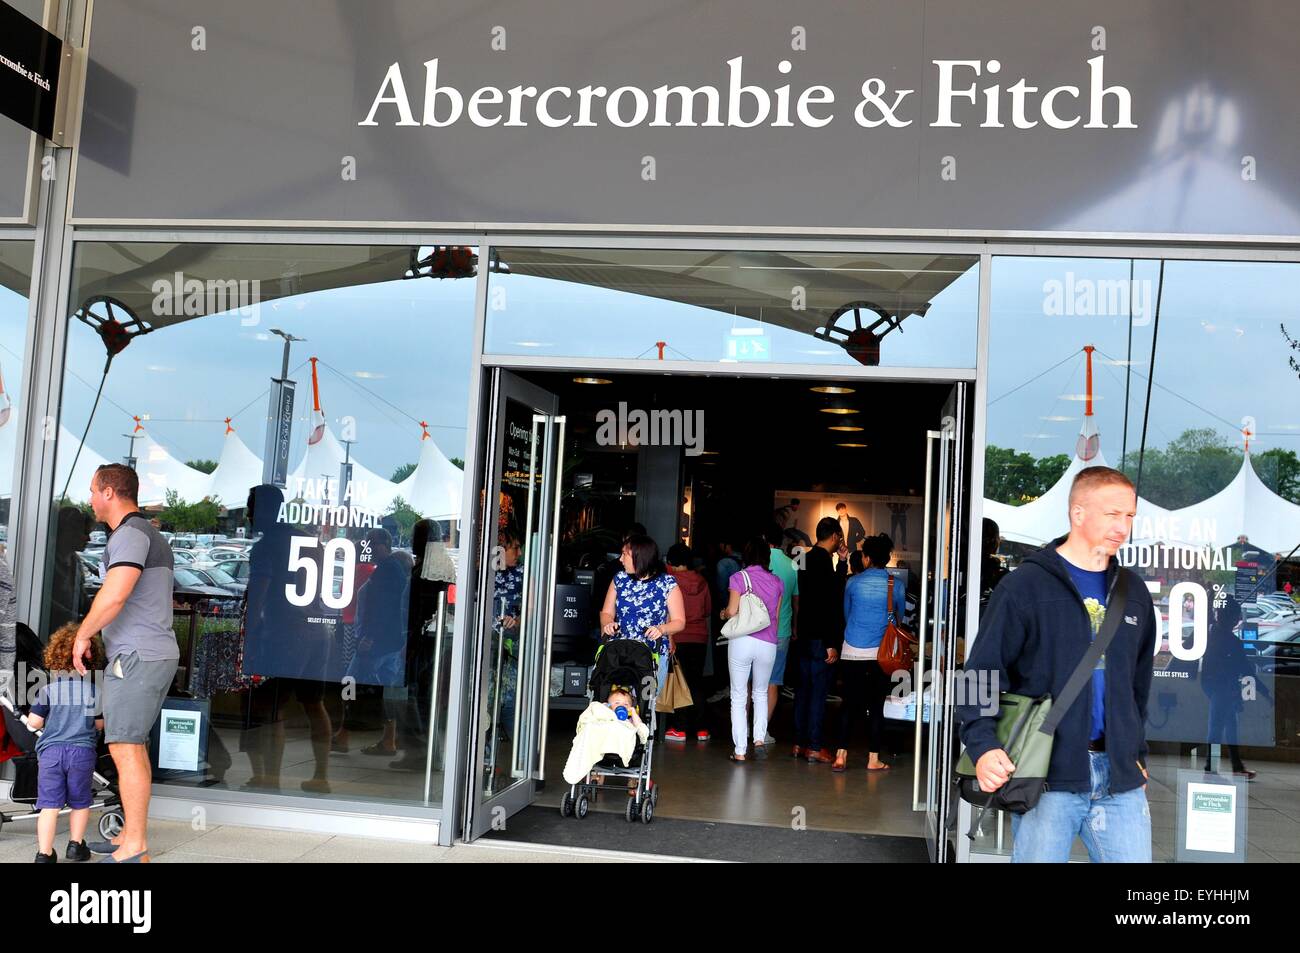 abercrombie & fitch uk